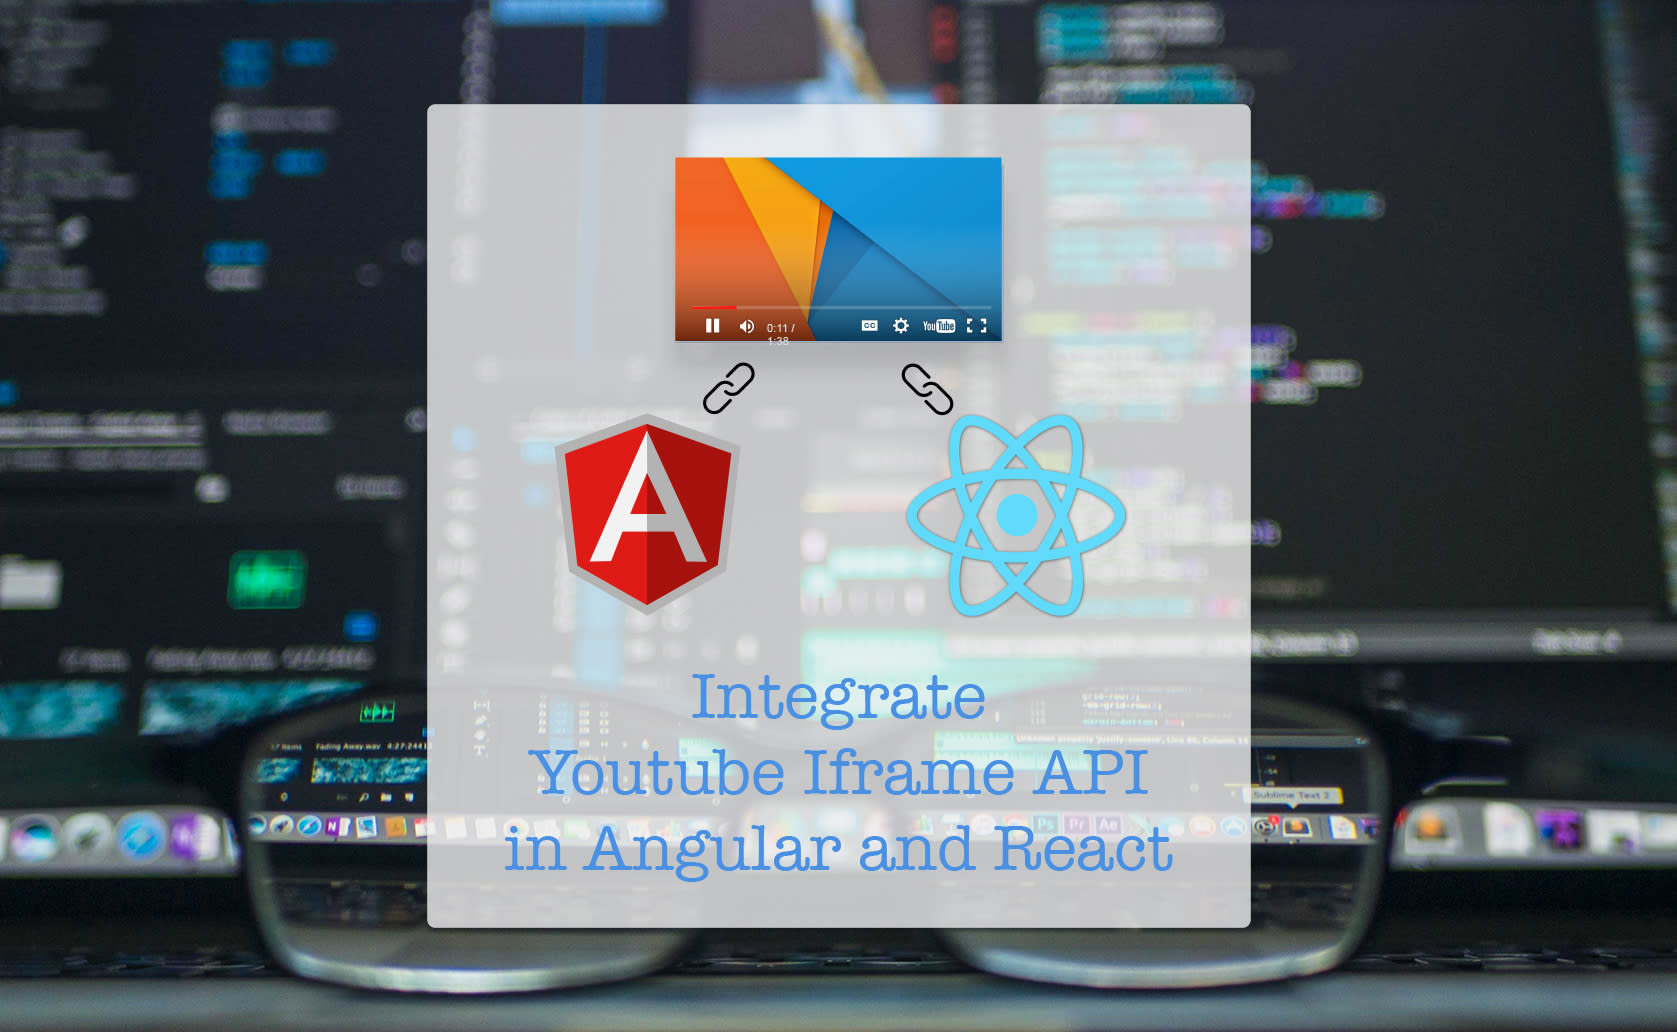 The easiest way to integrate Youtube Iframe API in Angular & React